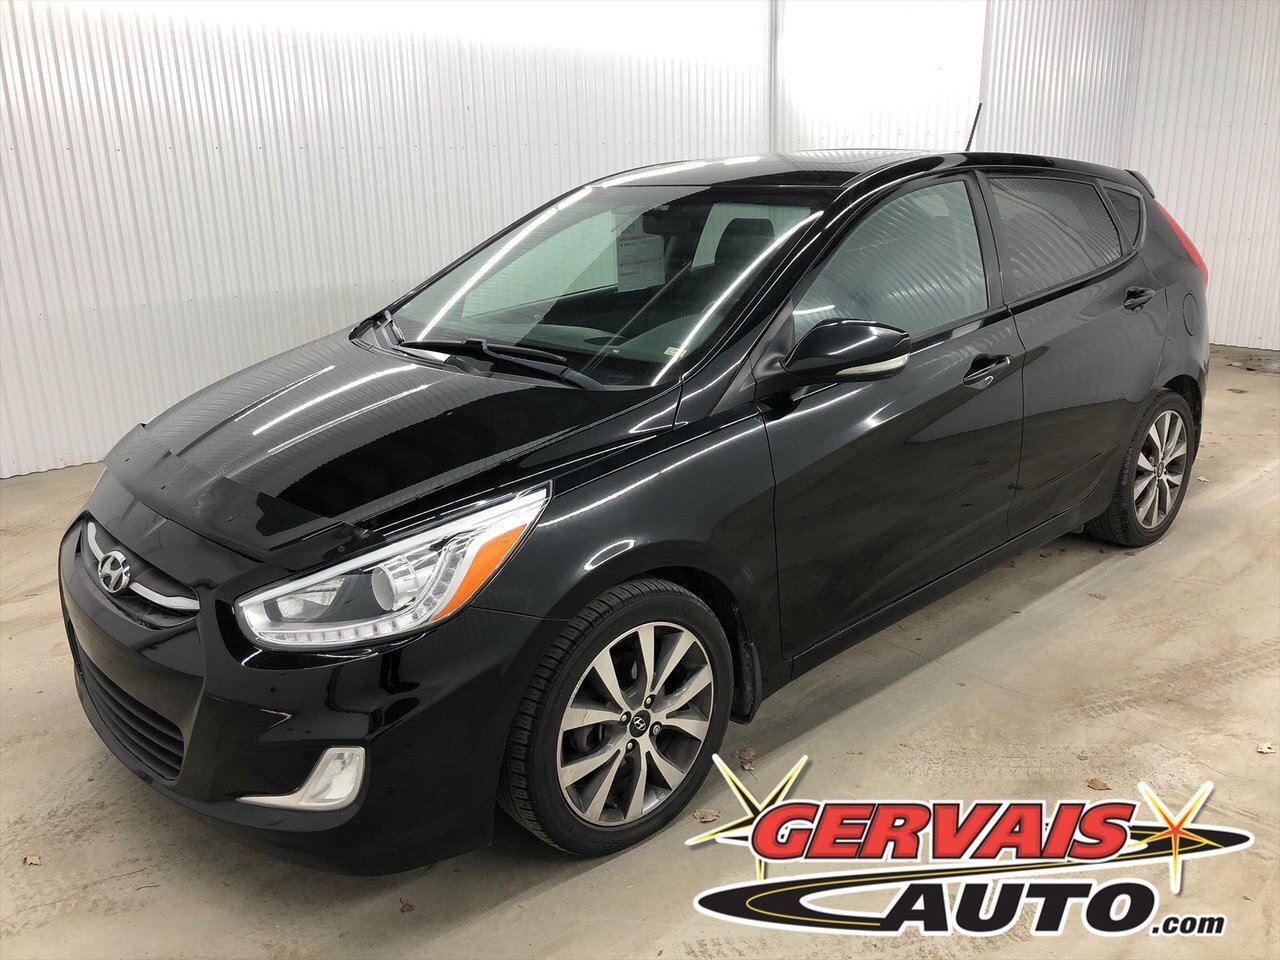 2017 Hyundai Accent GLS A/C Toit Ouvrant Mags